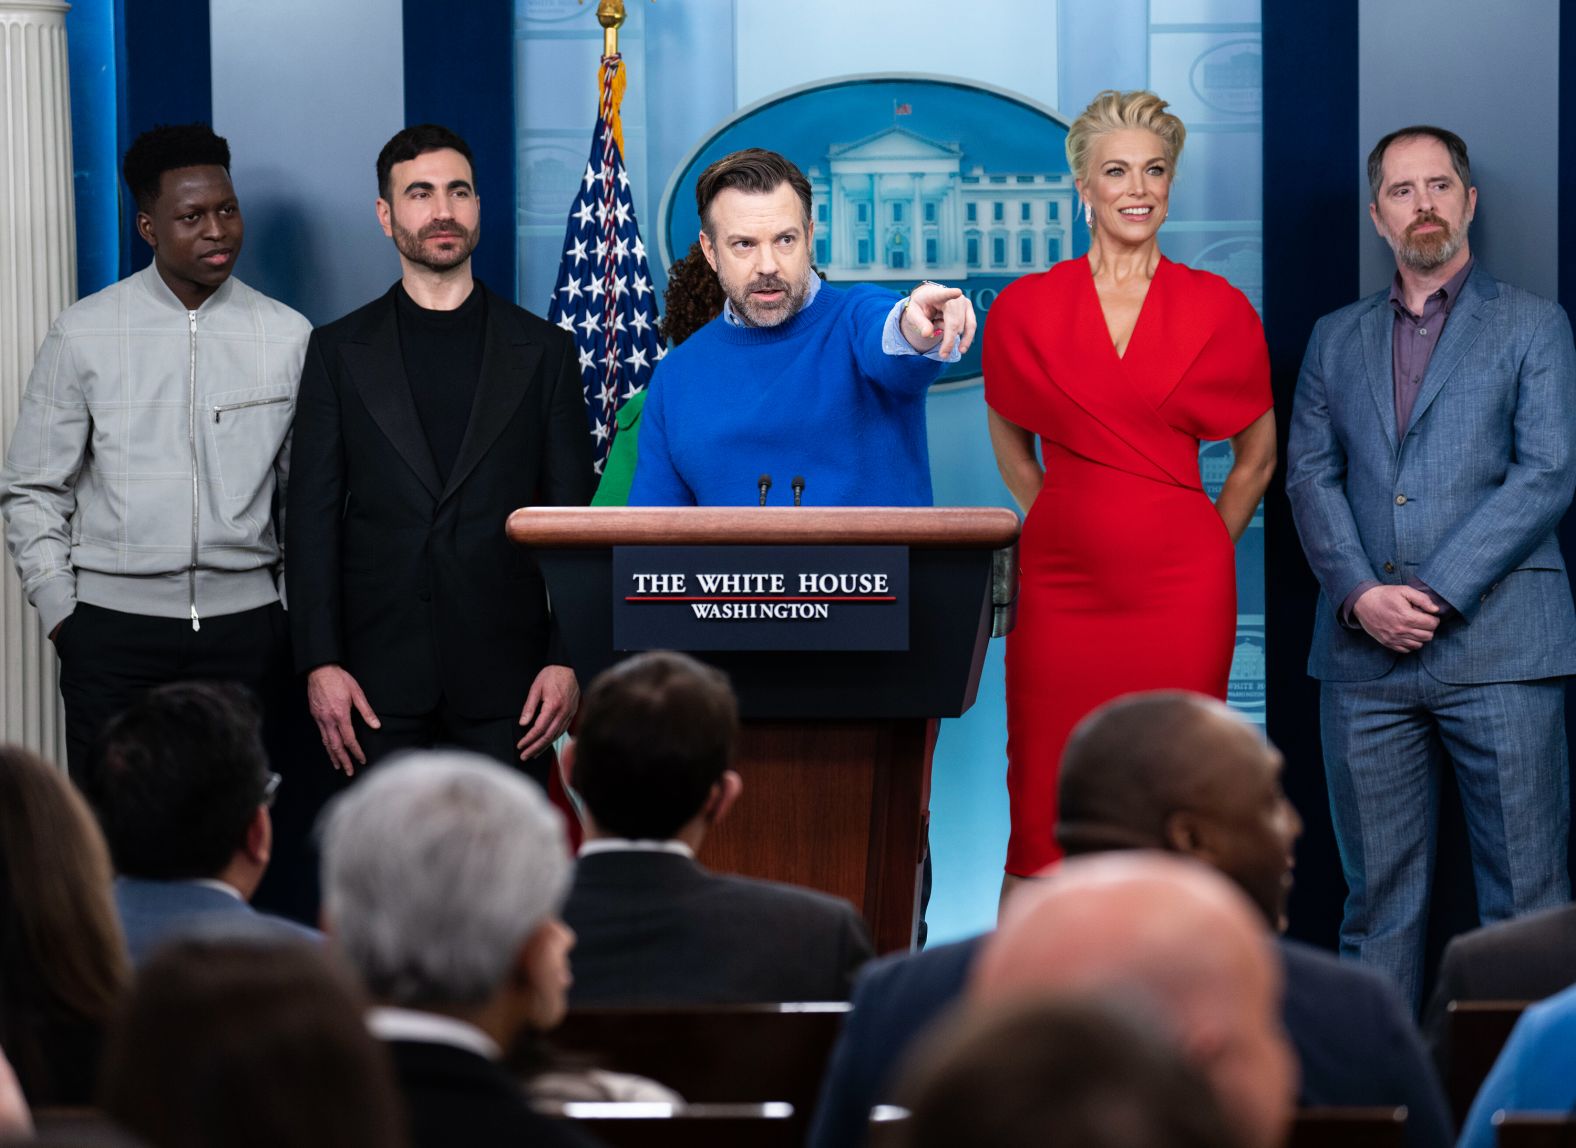 Actor Jason Sudeikis, center, is joined by other cast members of the show "Ted Lasso" as they <a href="index.php?page=&url=https%3A%2F%2Fwww.cnn.com%2F2023%2F03%2F19%2Fpolitics%2Fjason-sudeikis-ted-lasso-biden-white-house-mental-health%2Findex.html" target="_blank">visited the White House briefing room</a> on Monday, March 20. With Sudeikis, from left, are Toheeb Jimoh, Brett Goldstein, Hannah Waddingham and Brendan Hunt. Sudeikis said they are teaming up with US President Joe Biden to make sure Americans know about the options that are available to help with mental health.